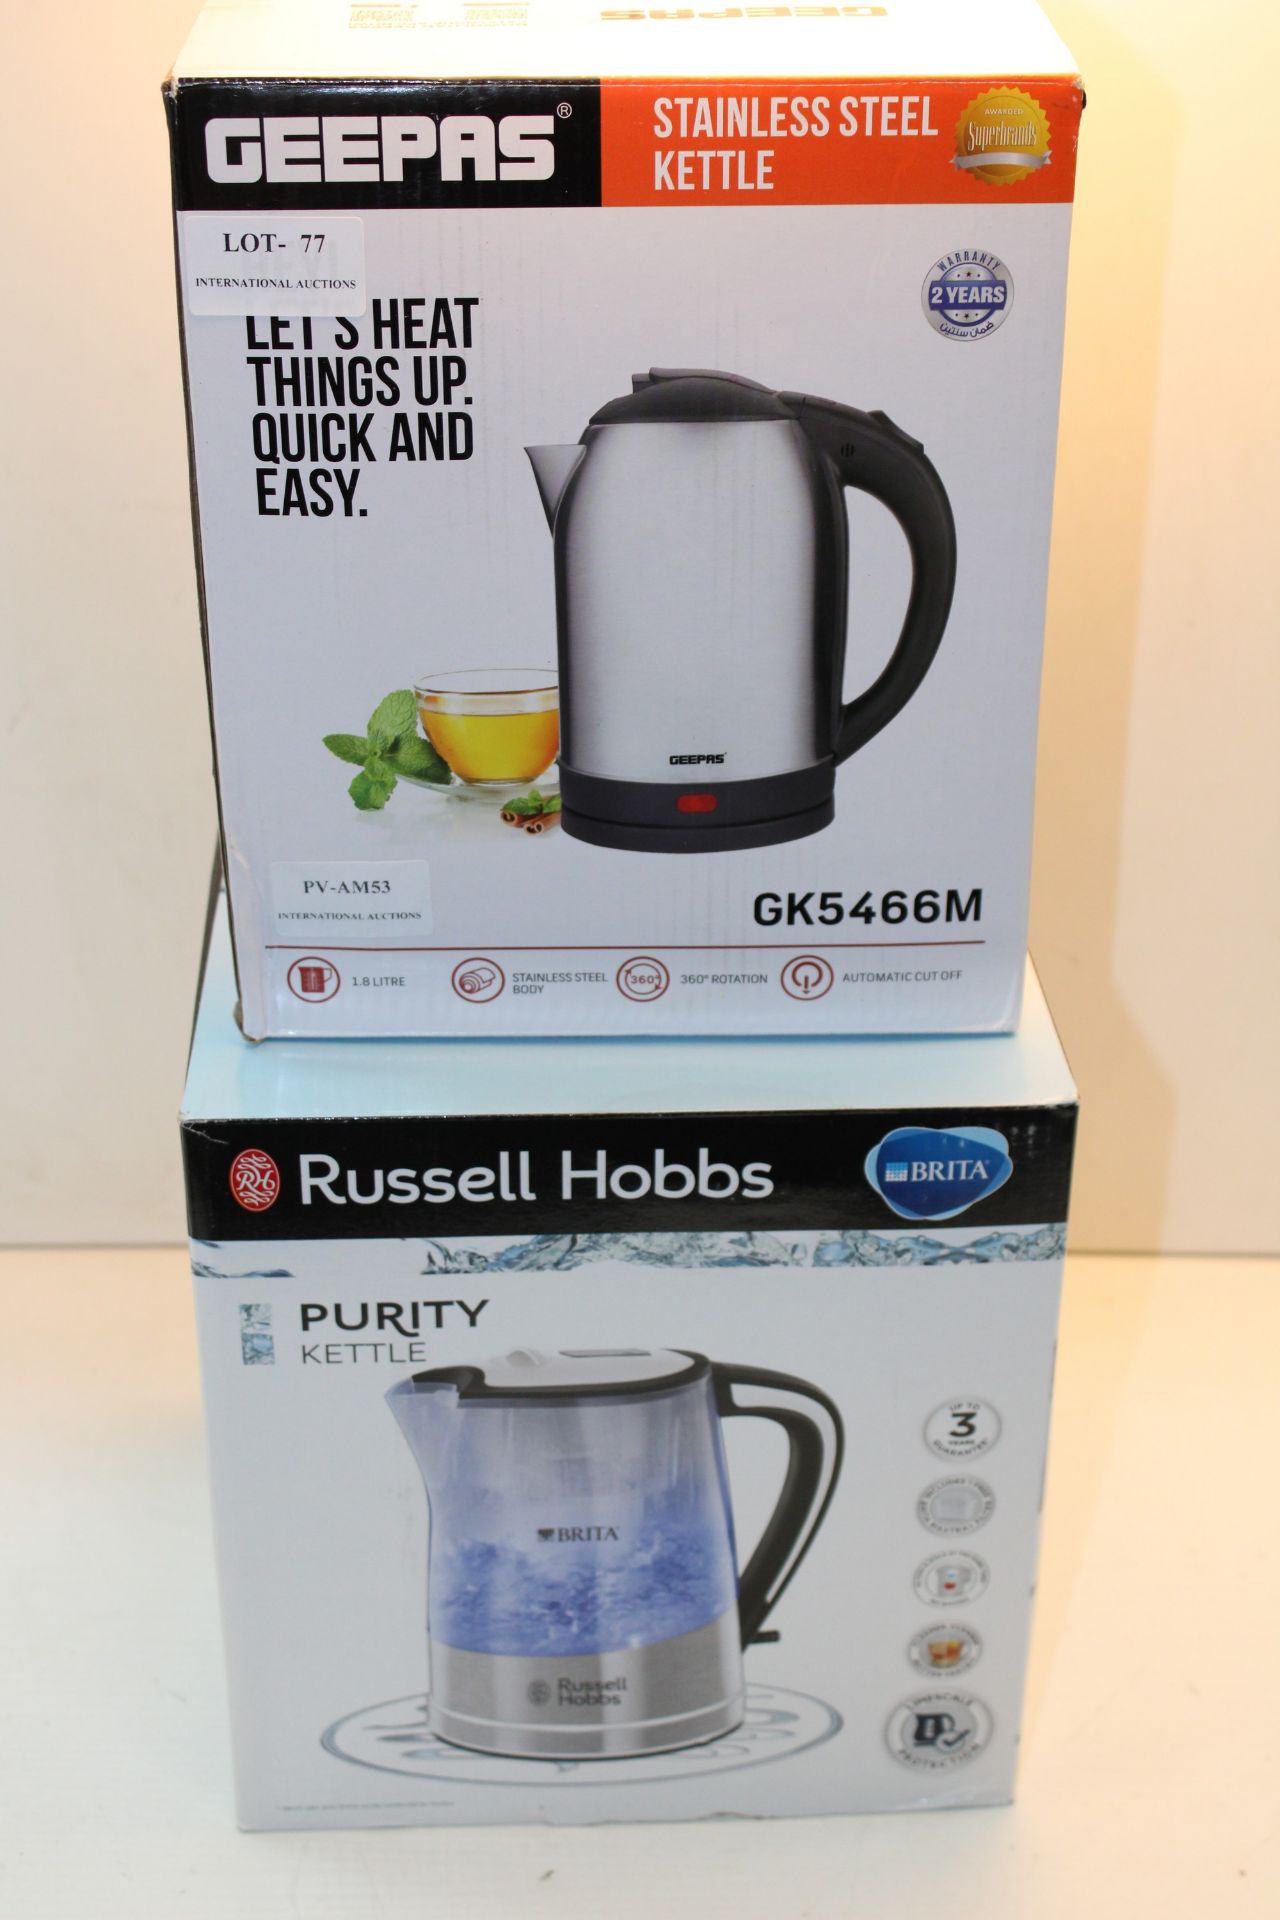 2X BOXED ASSORTED KETTLES BY GEEPAS & RUSSELL HOBBS (IMAGE DEPICTS STOCK)Condition ReportAppraisal